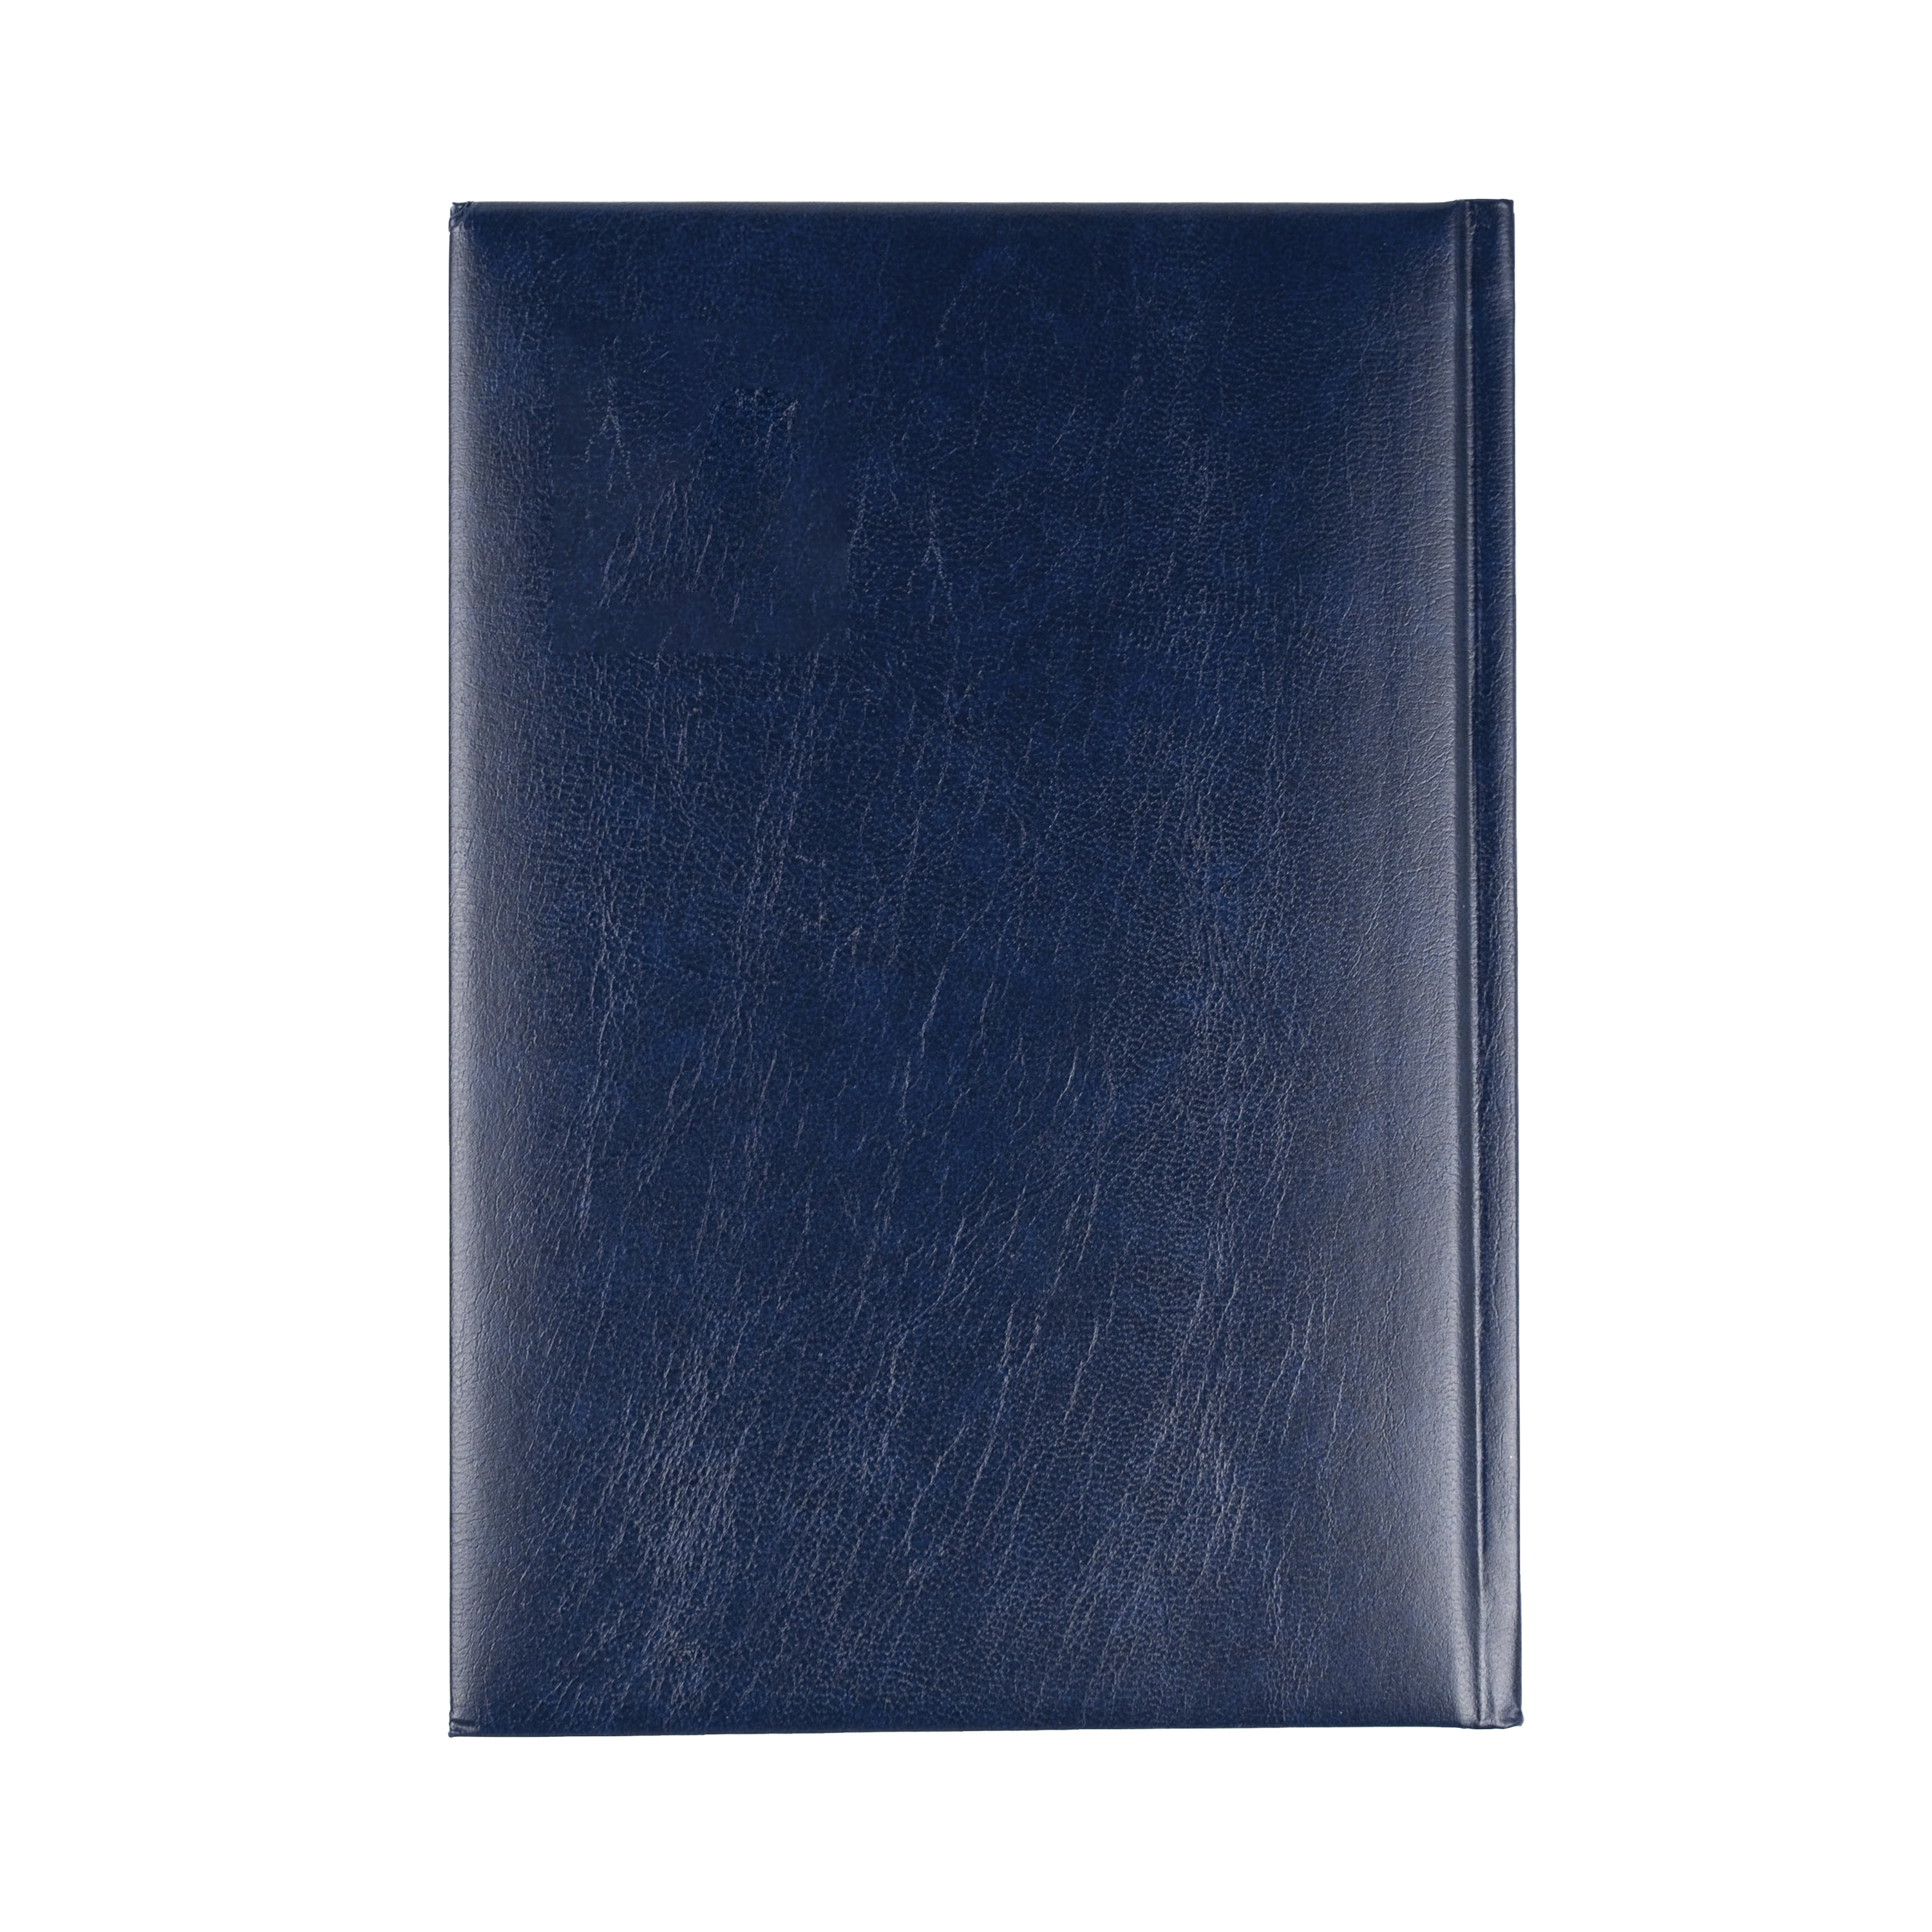 Sterling 2024 Diary - Day to Page, Size A5 Blue / A5 (210 x 148mm)